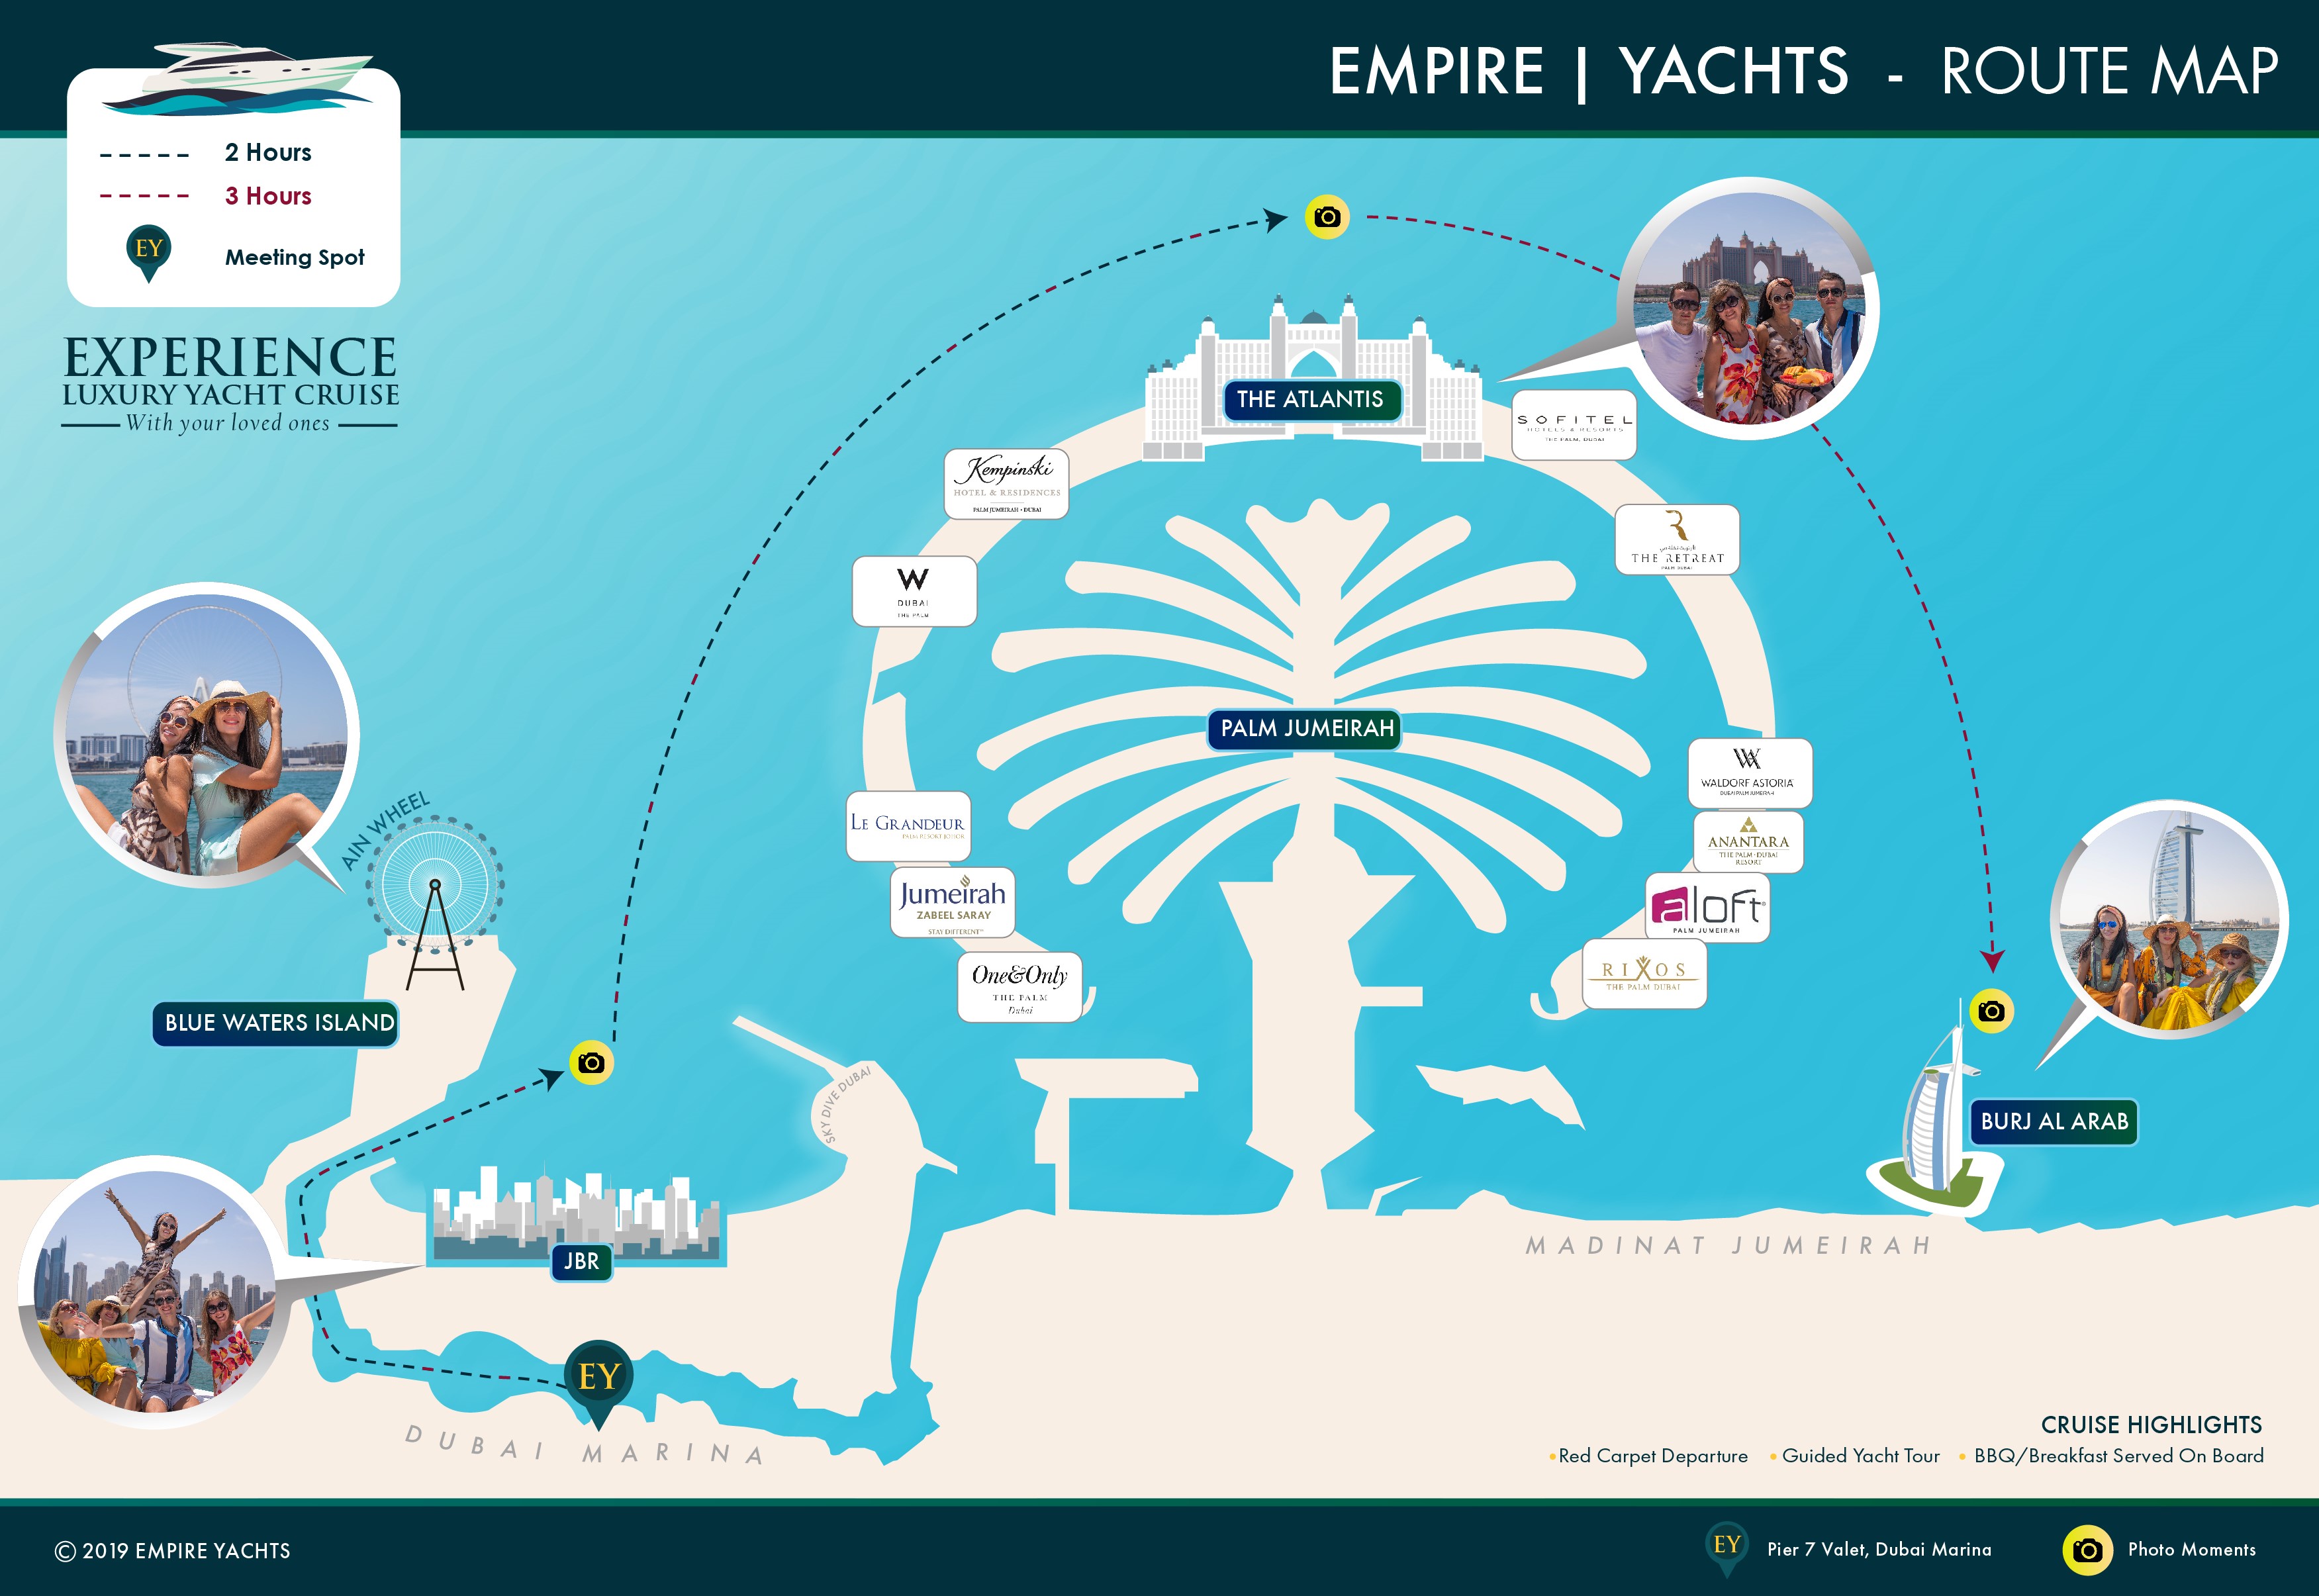 Empire Yachts - Route Map